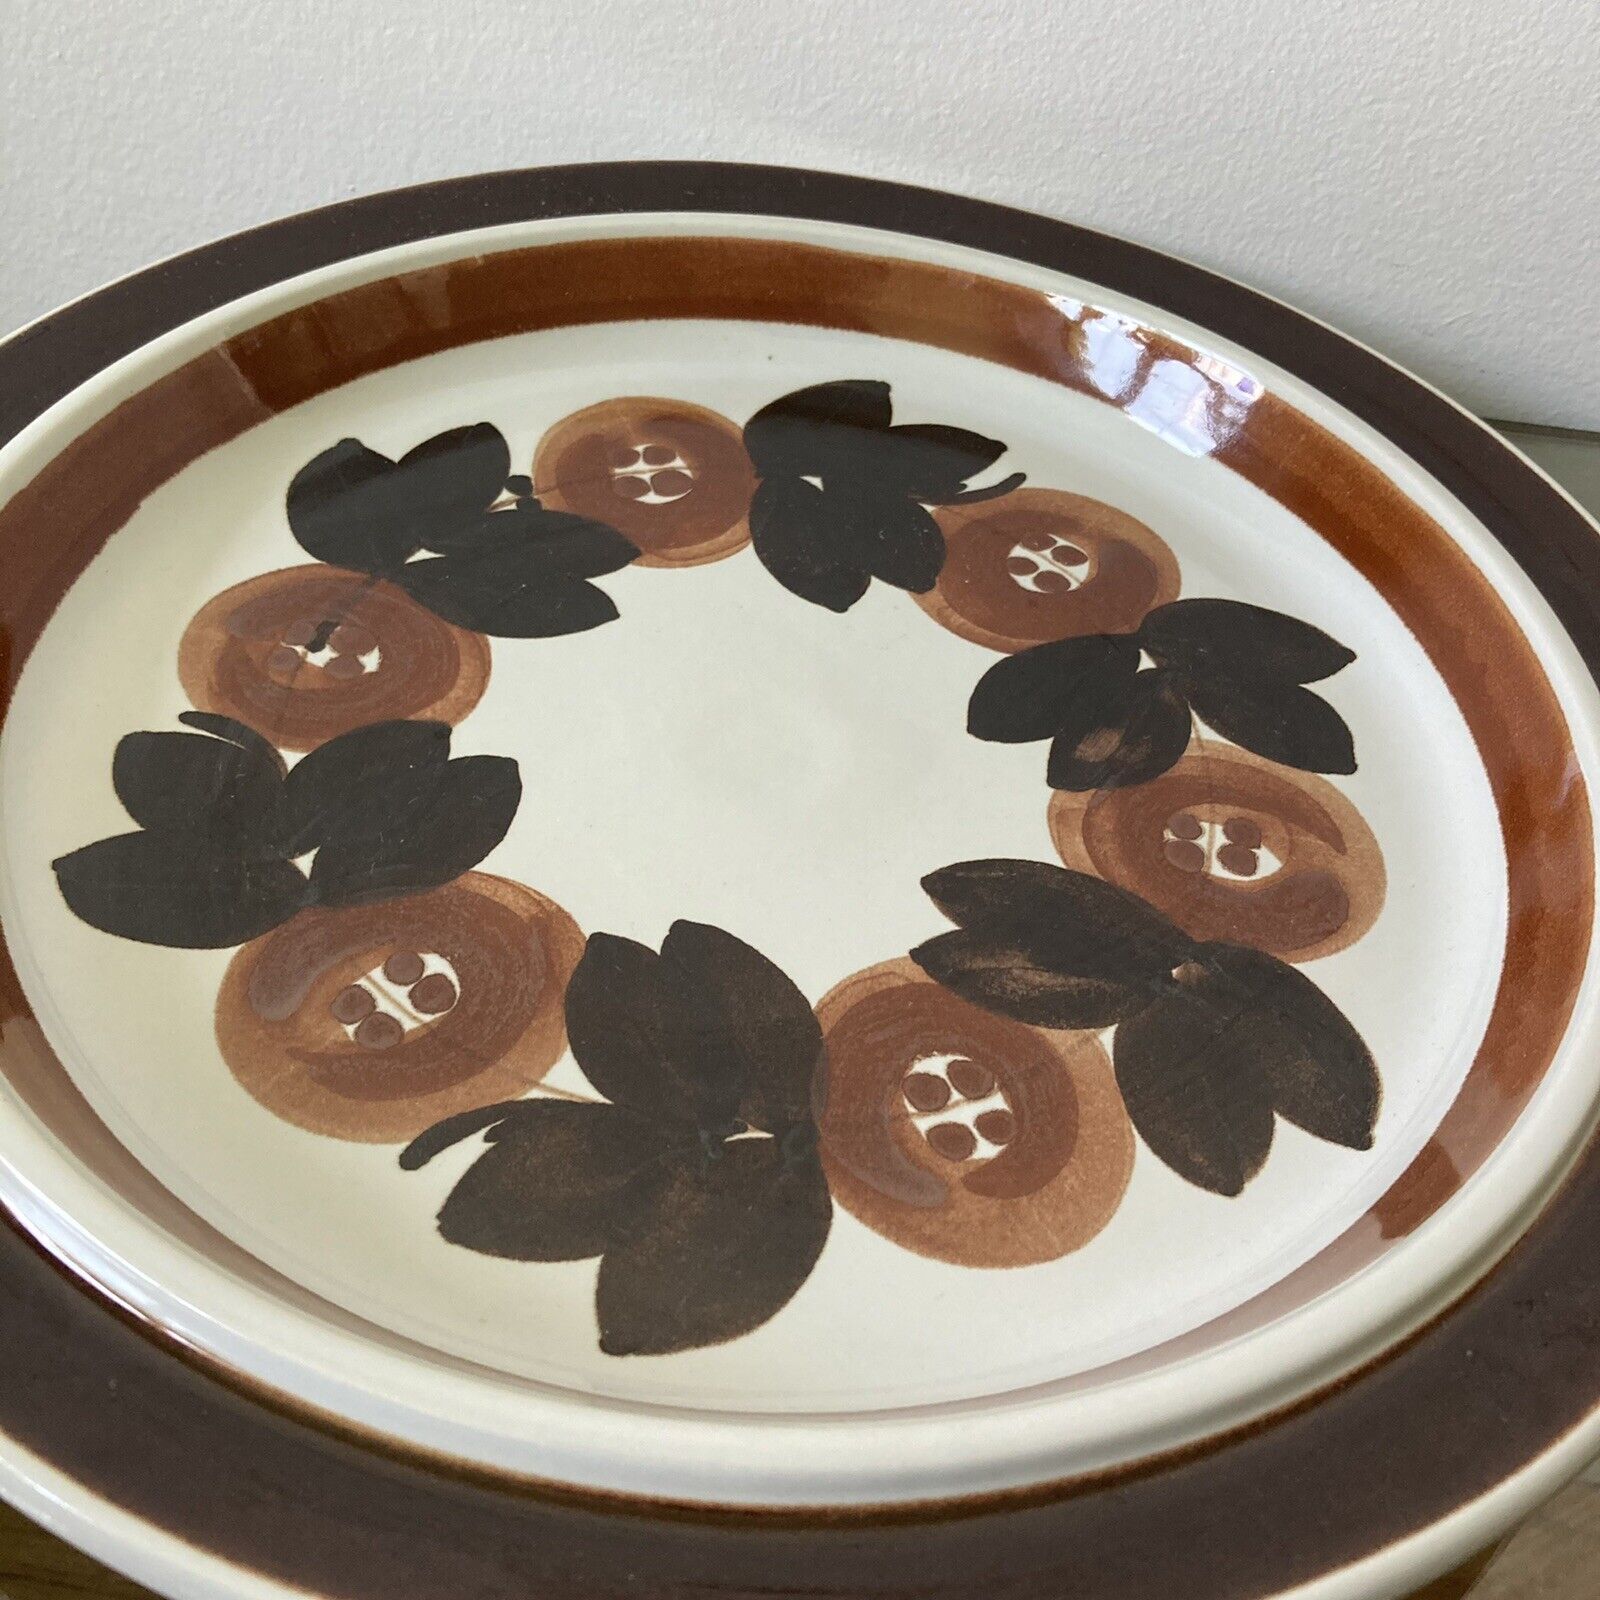 Read more about the article 12.5” MCM Platter Serving Plate Arabia Finland Rosmarin Procope Brown Floral